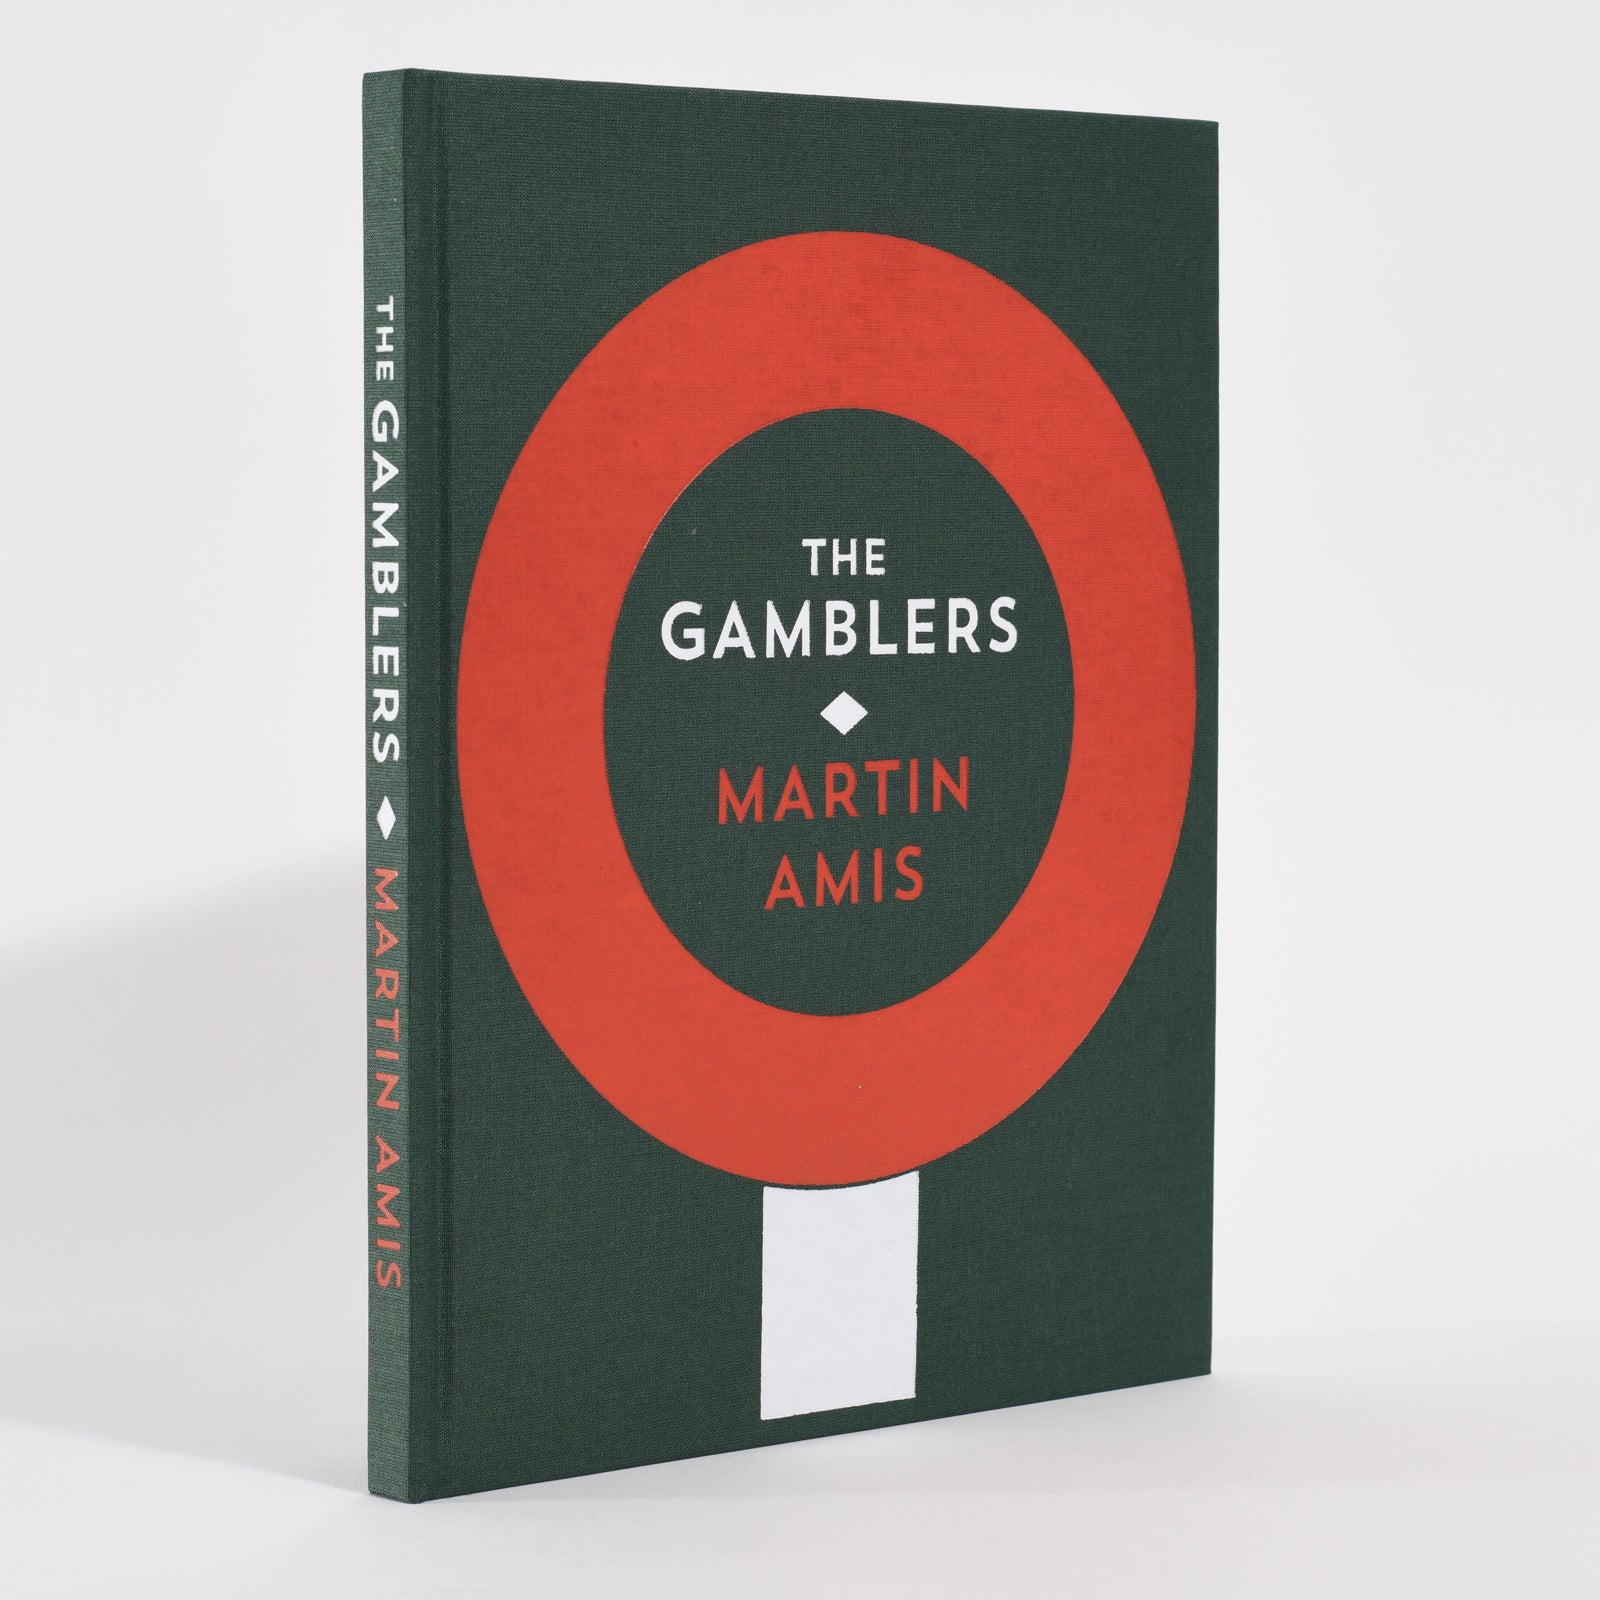 Martin Amis - The Gamblers (Signed)